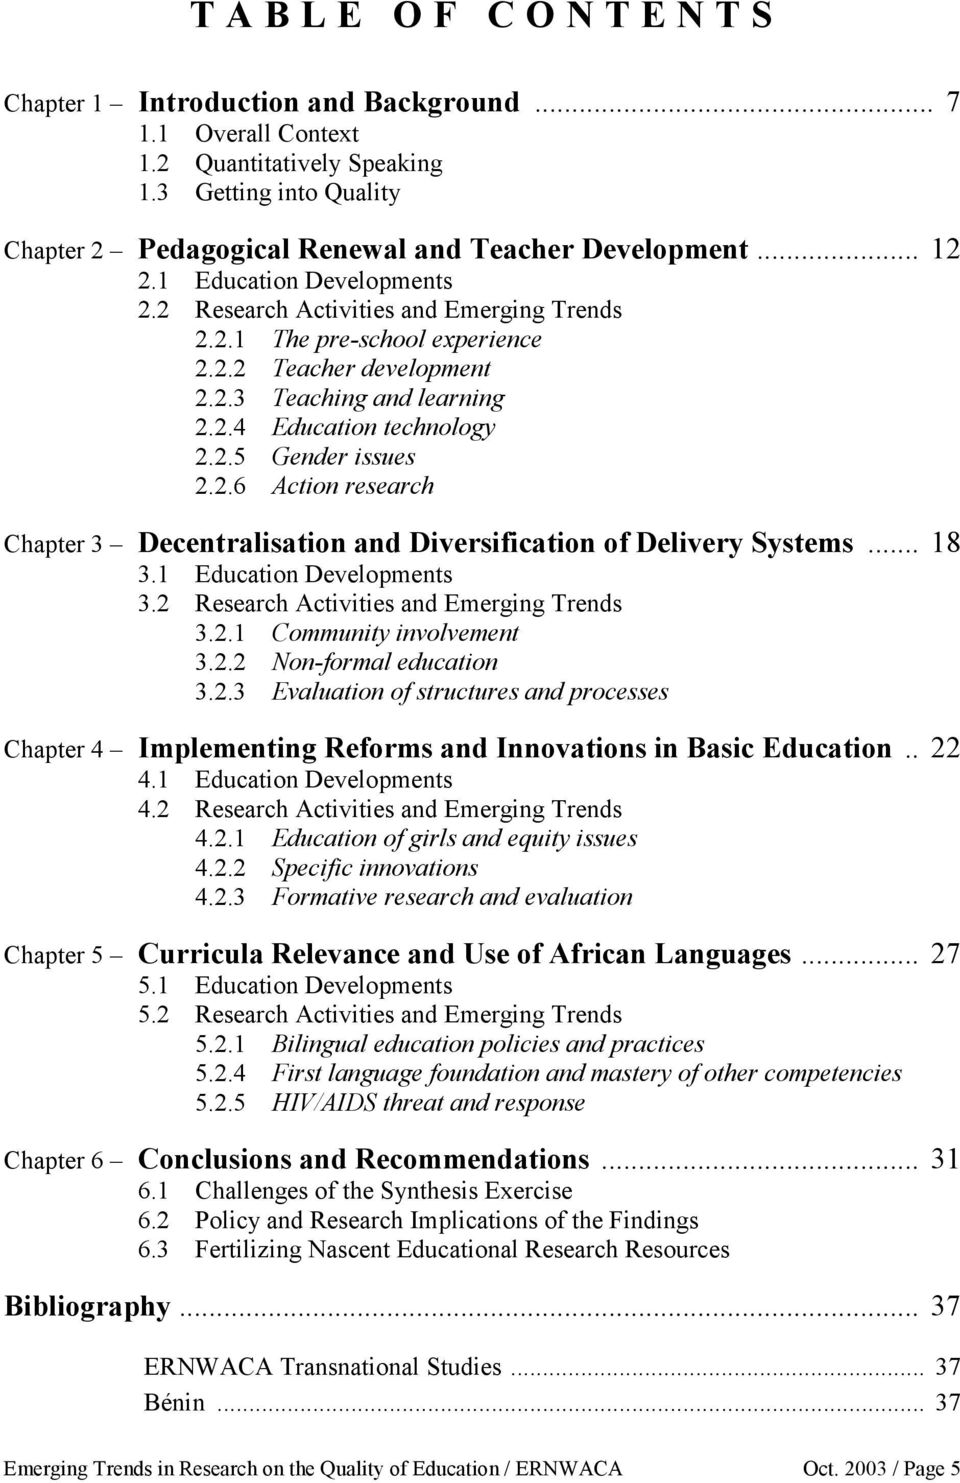 2.6 Action research Chapter 3 Decentralisation and Diversification of Delivery Systems... 18 3.1 Education Developments 3.2 Research Activities and Emerging Trends 3.2.1 Community involvement 3.2.2 Non-formal education 3.